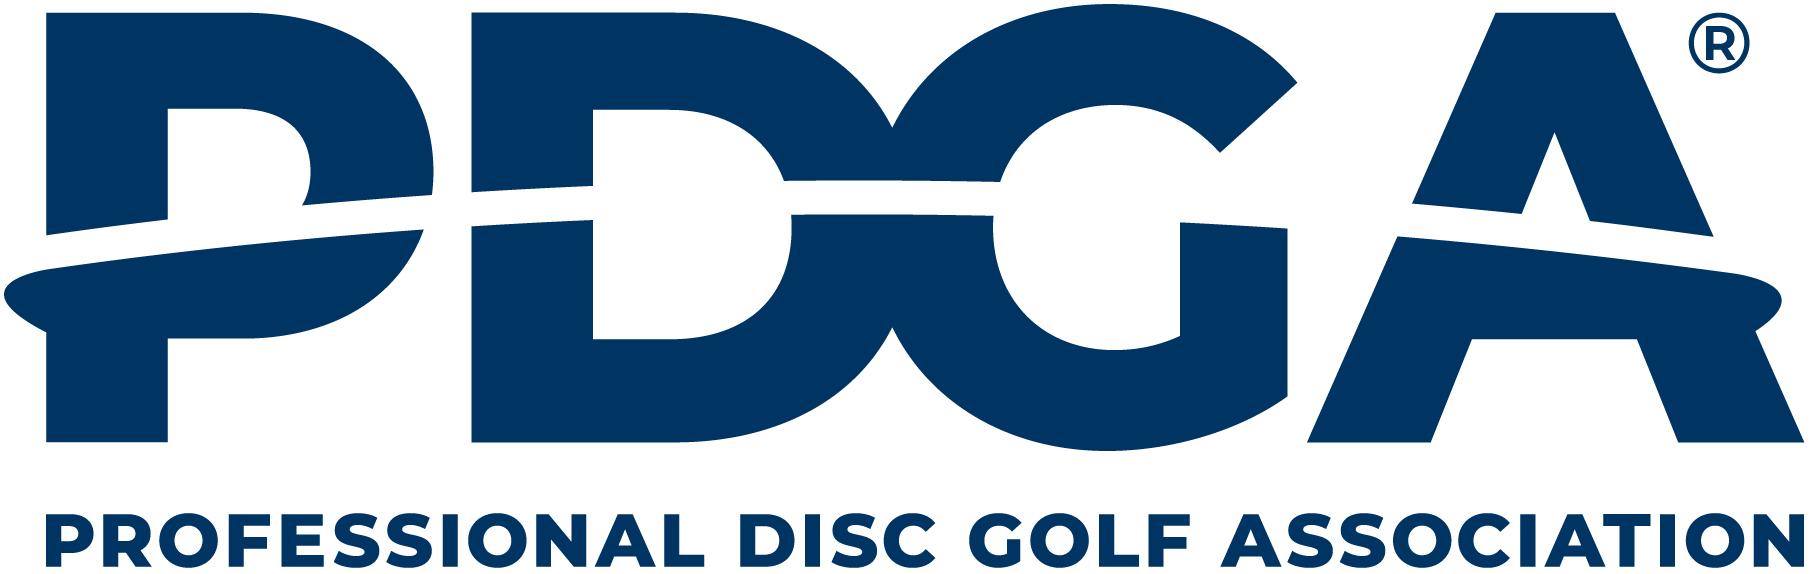 2022 PDGA Champions Cup Event Schedule Professional Disc Golf Association